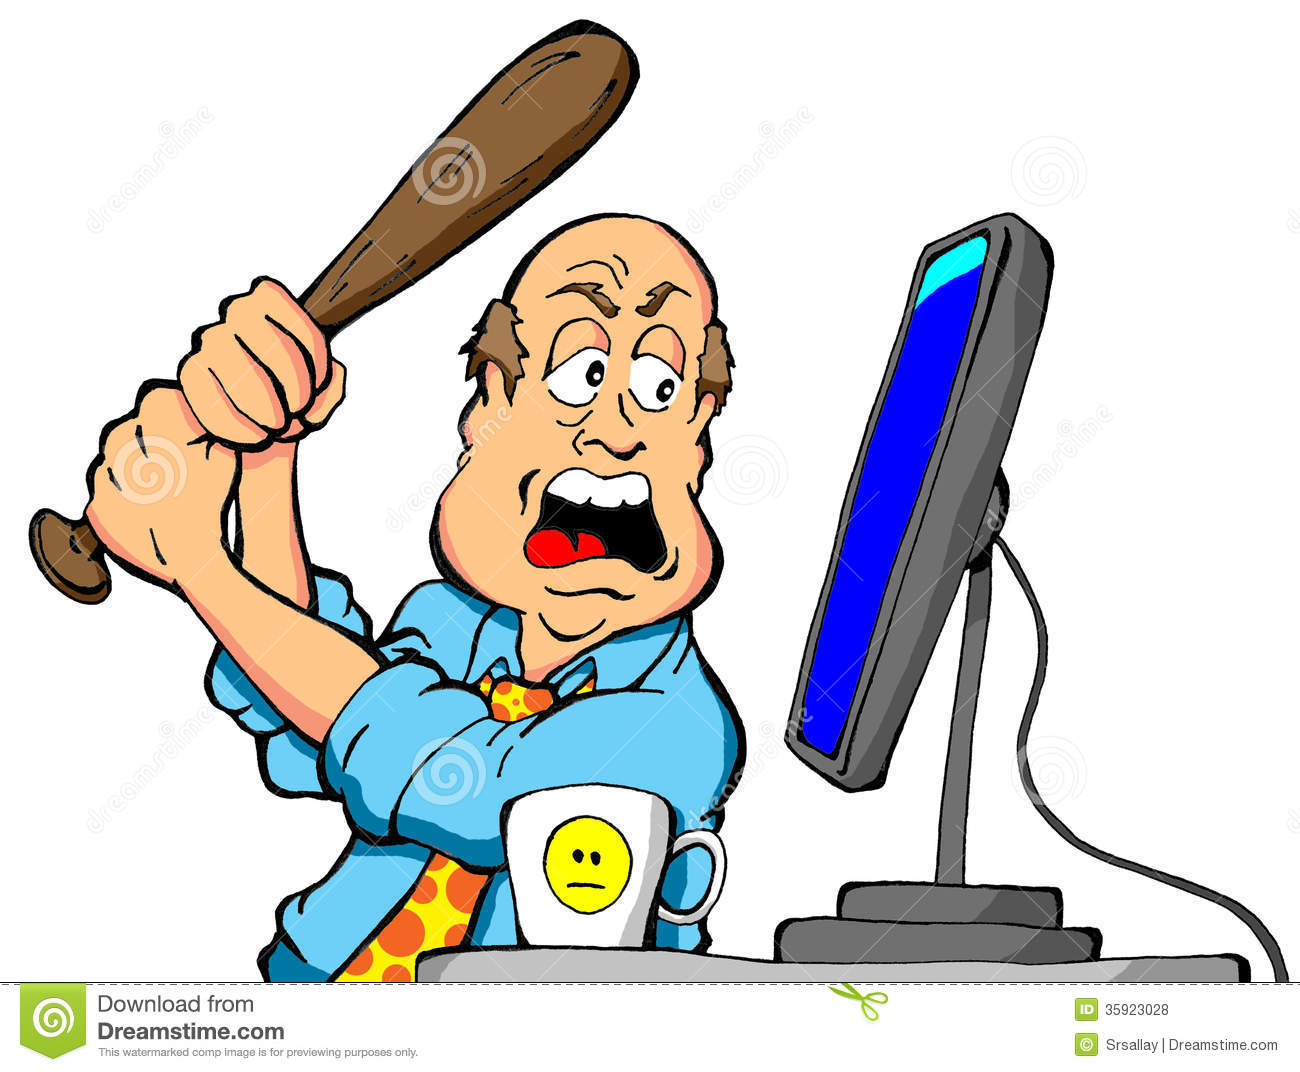 Cartoon Of An Angry Computer User About To Destroy His Computer With A